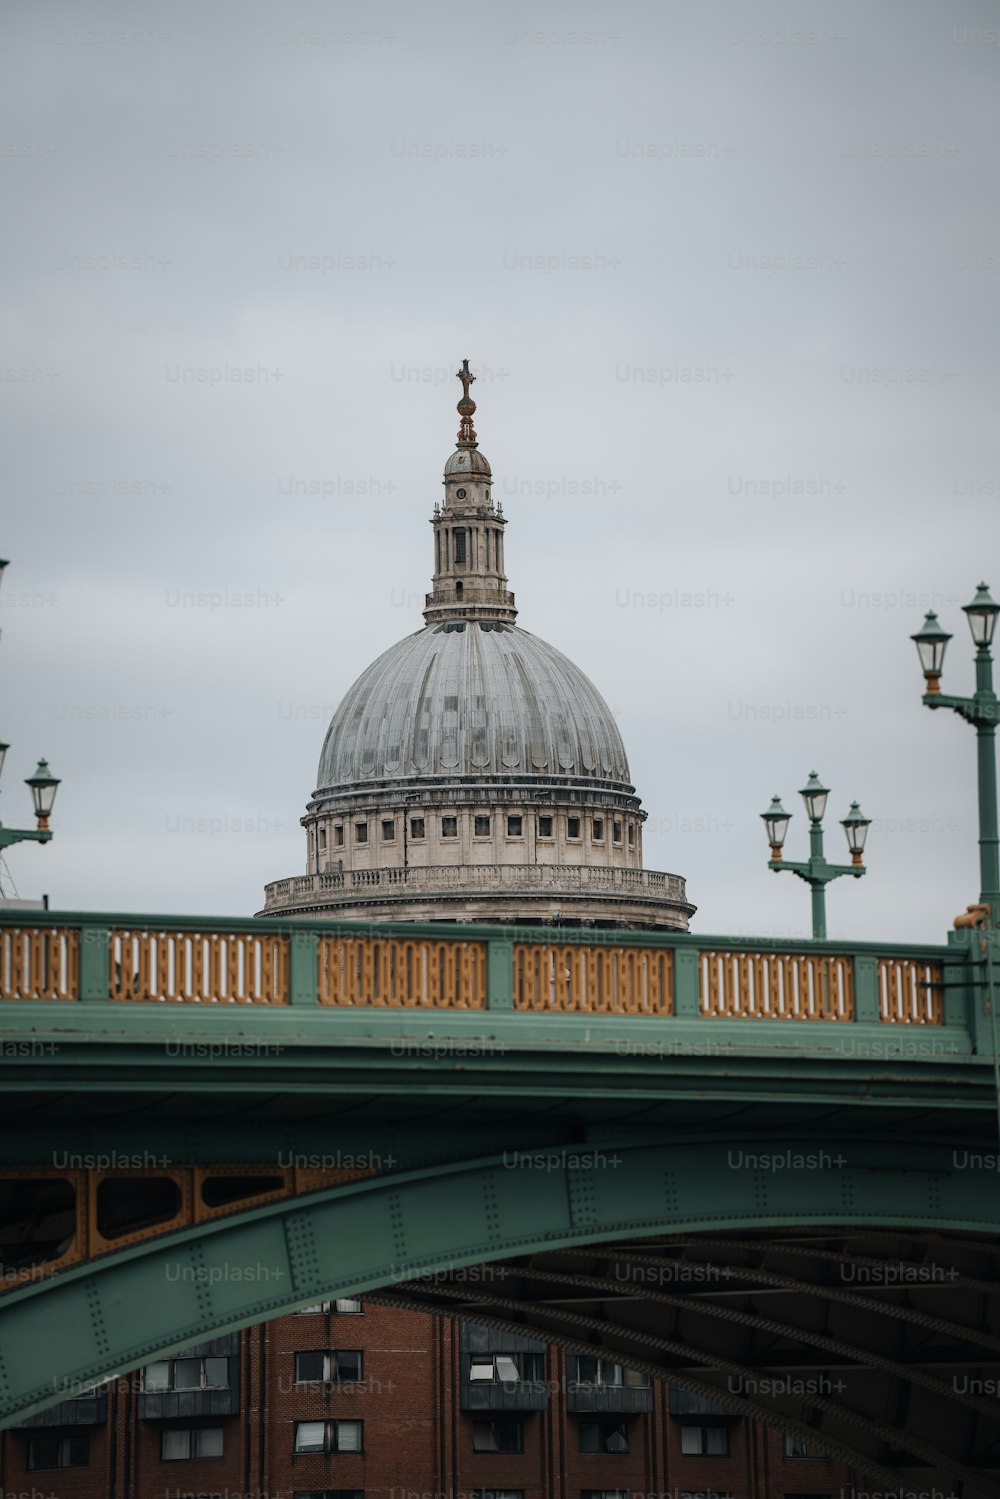 the dome of a building is seen from across a bridge